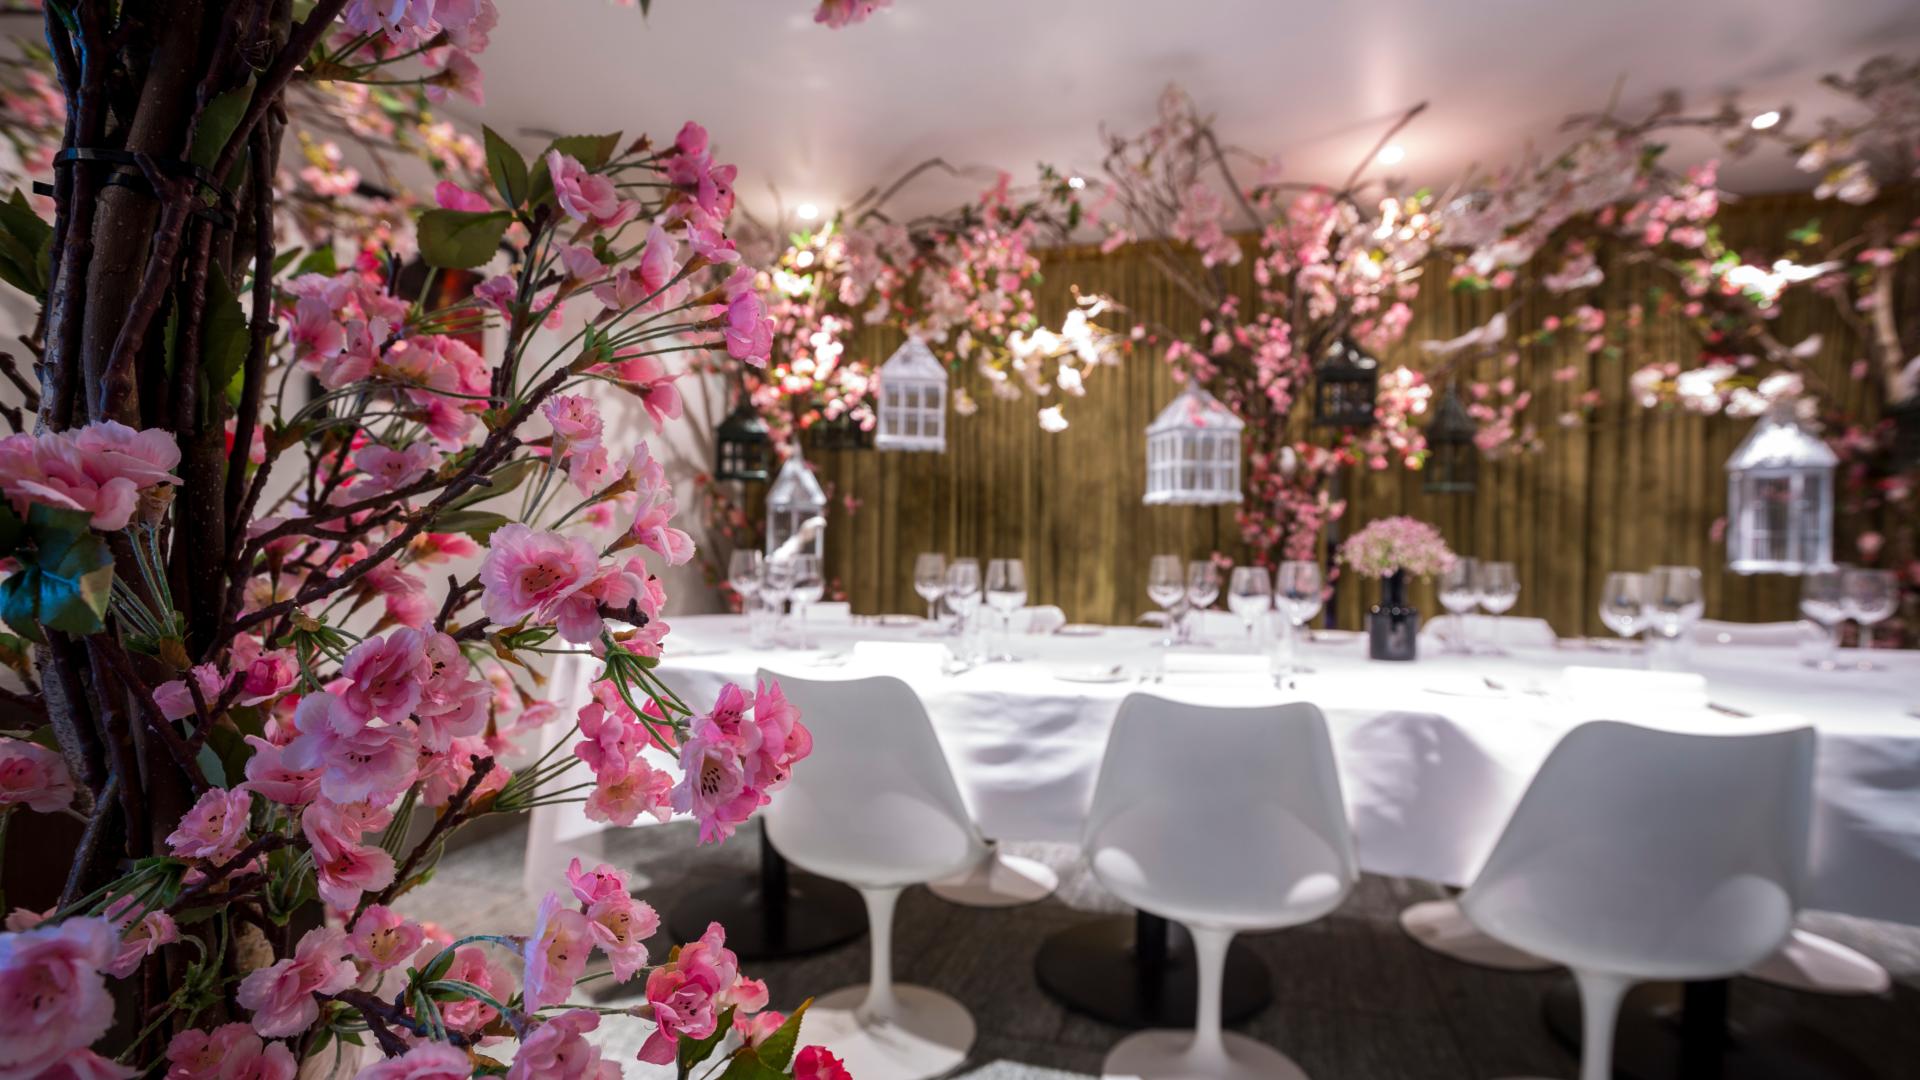 Baby Shower Venues for Hire in Sydney